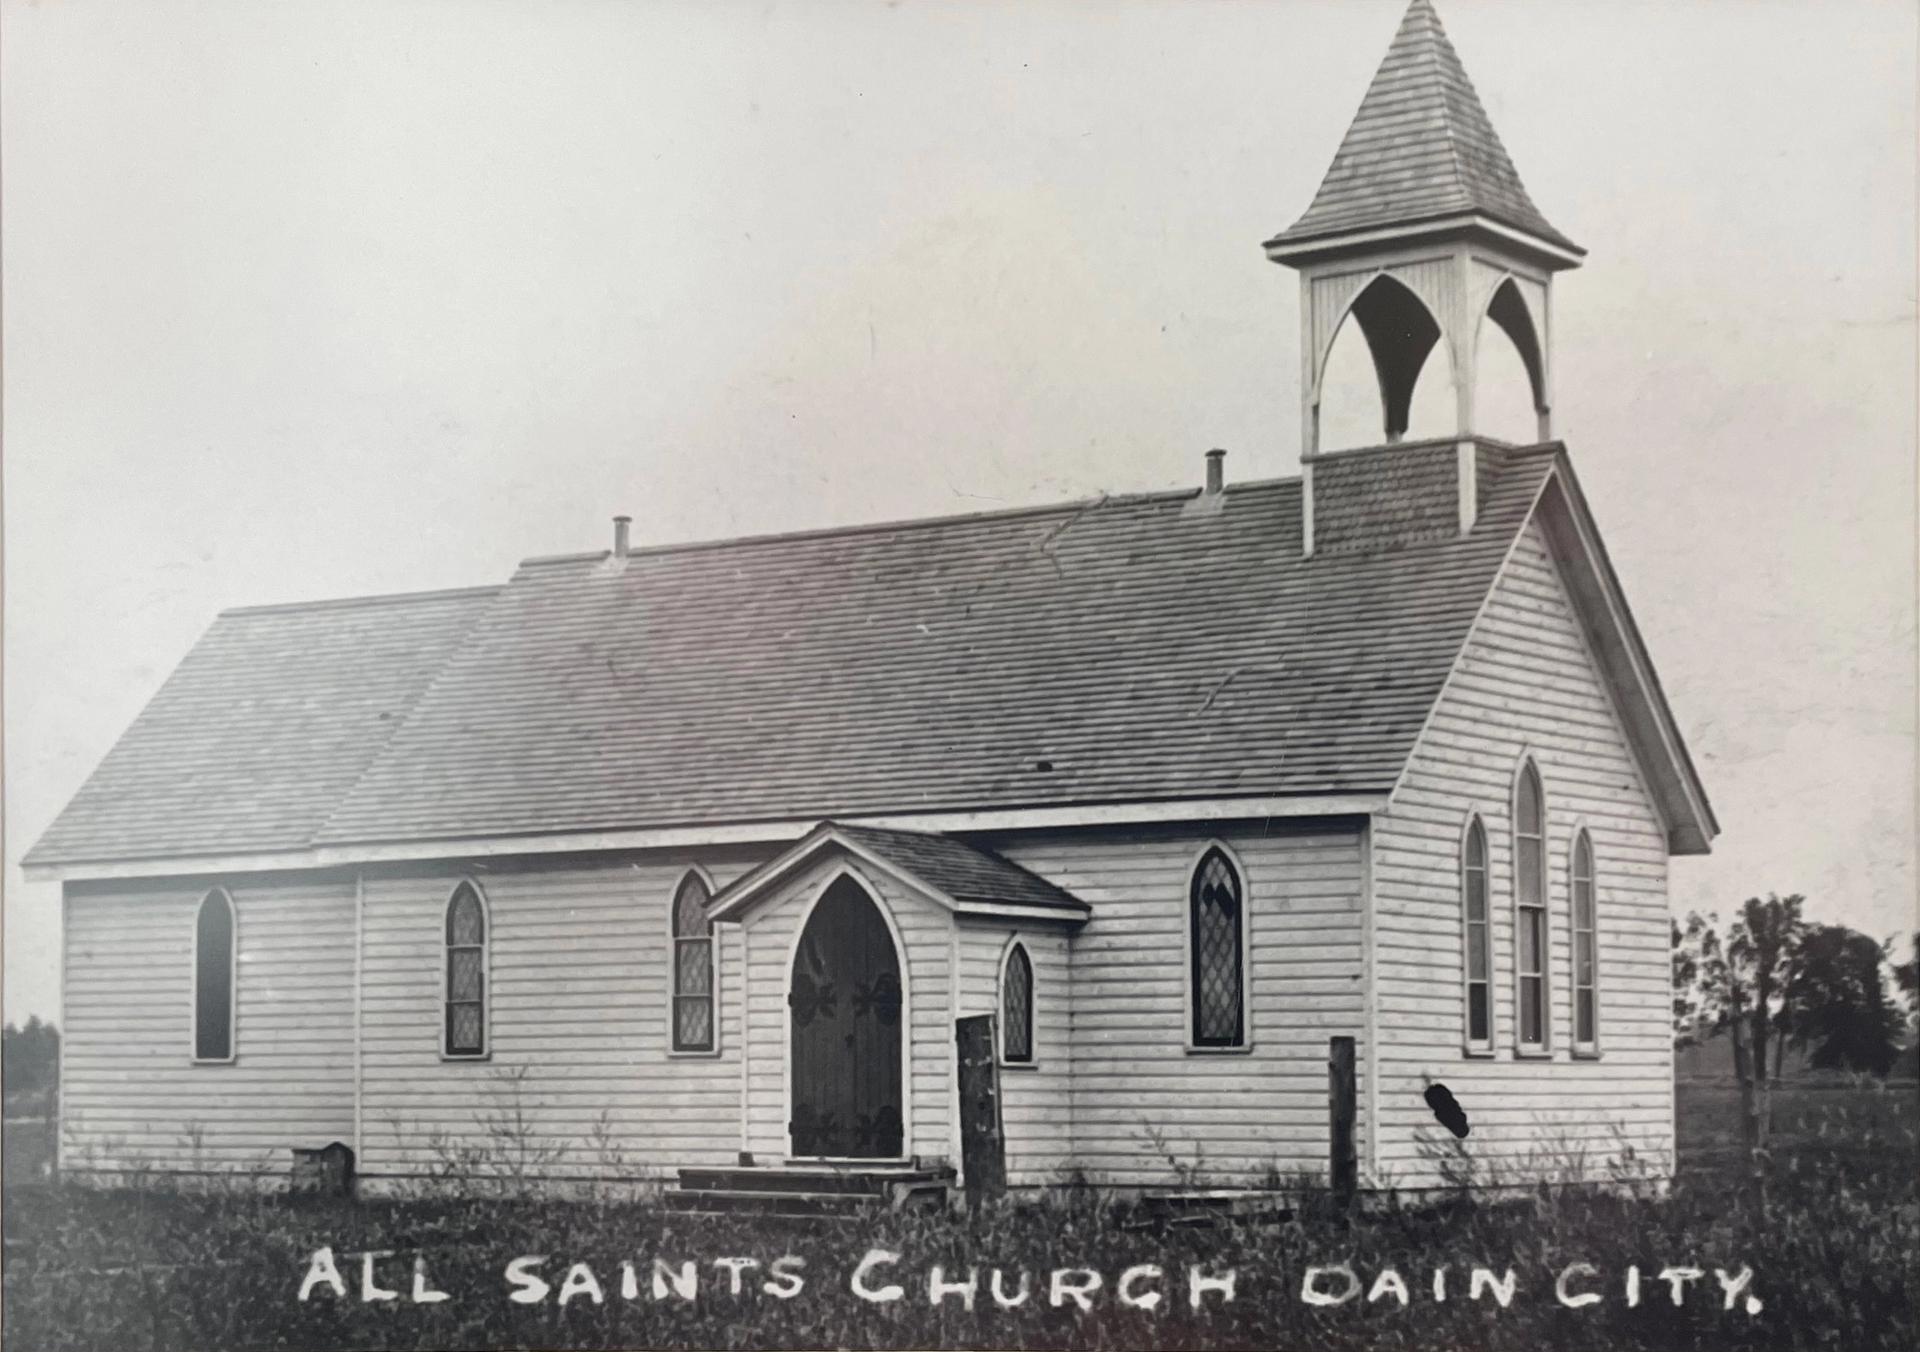 Old black and white photo of the original All Saints Church in Dain City